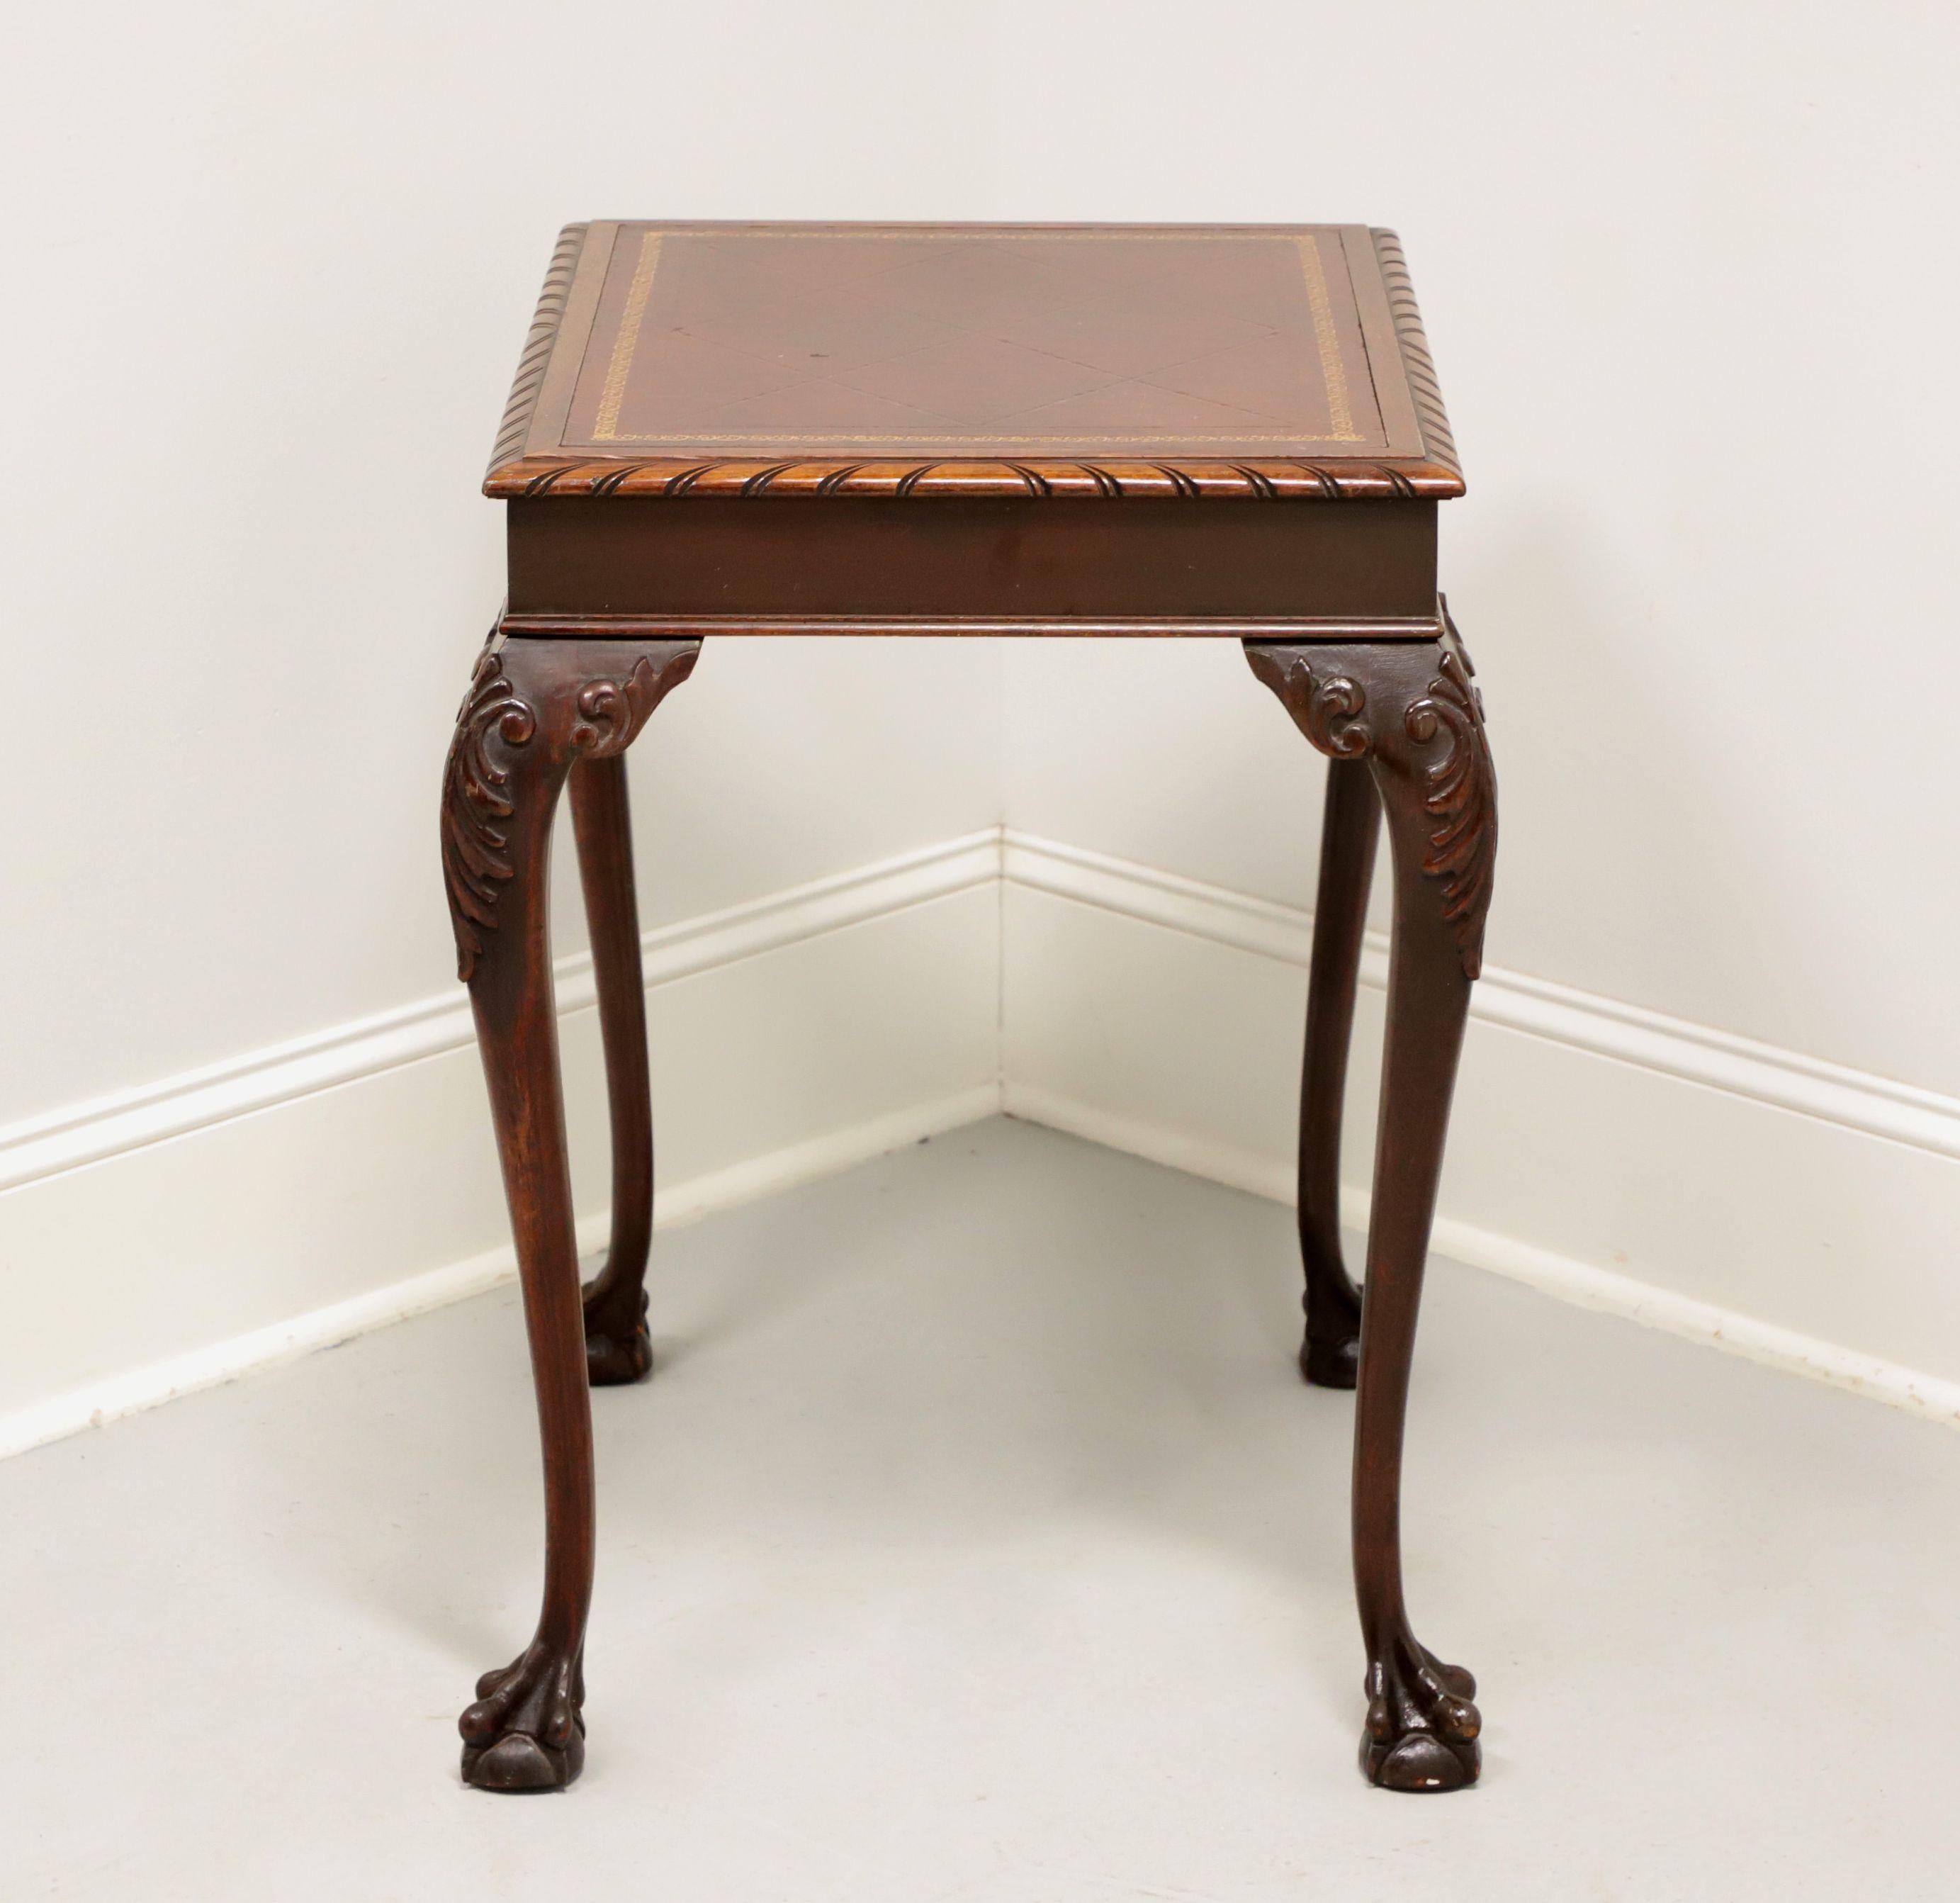 A Chippendale style rectangular side table by Superior Table, now part of Kindel Furniture. Solid mahogany, embossed leather top with gadroon edge, ogee edge to apron, carved acanthus leaves to knees, cabriole legs and ball in claw feet. Made in